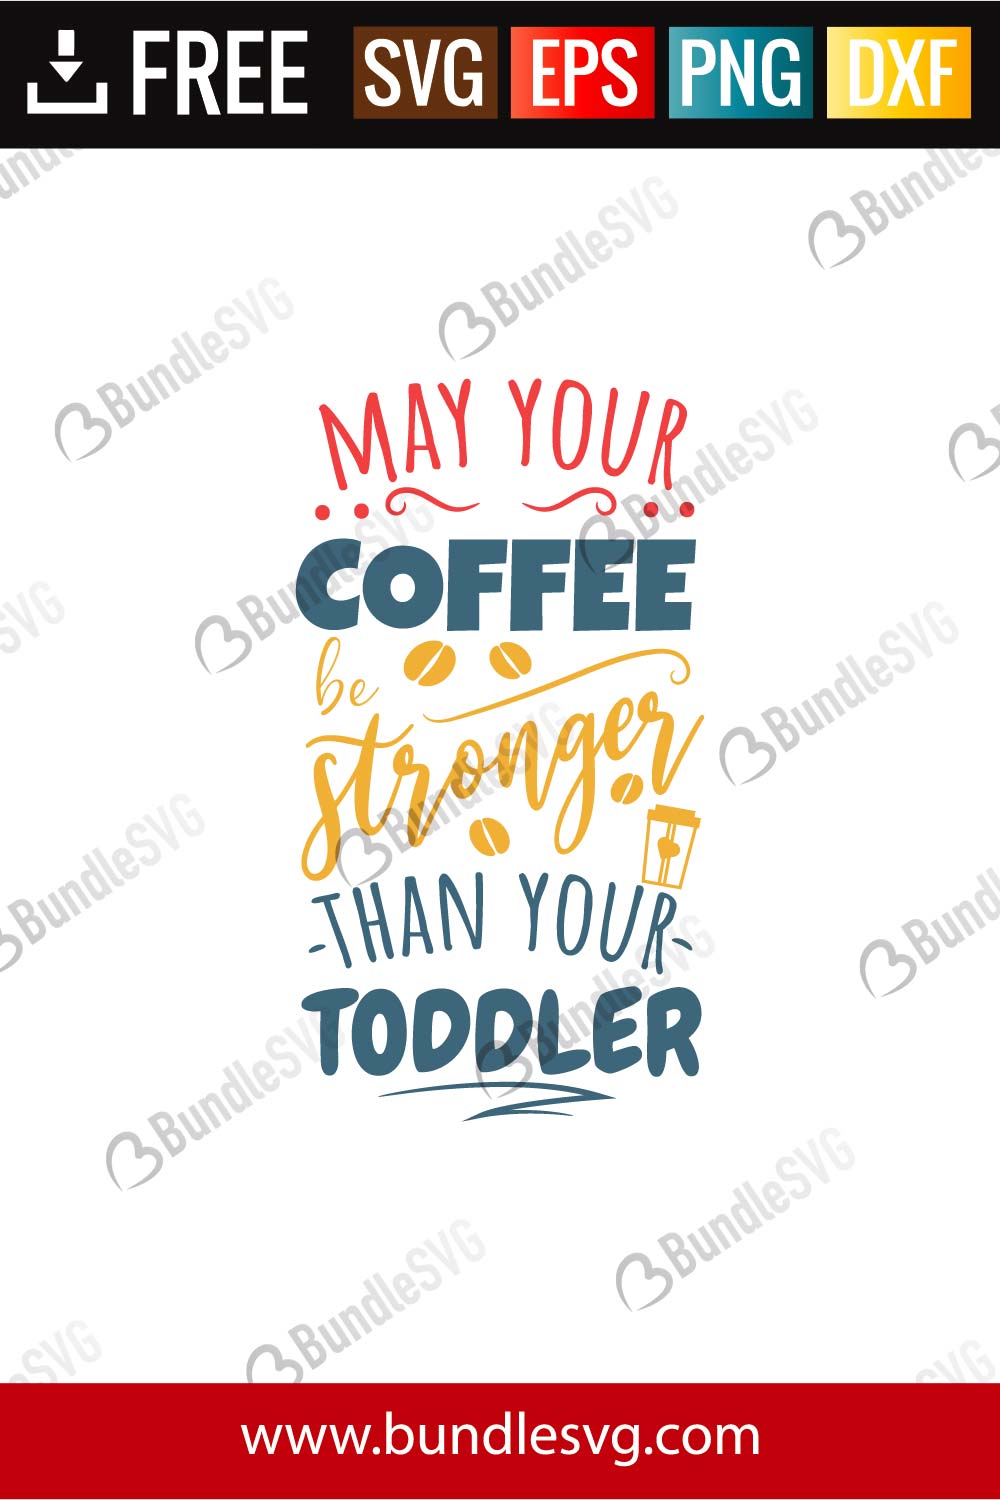 Download May Your Coffee Be Stronger Than Your Toddler Svg Cut Files Bundlesvg